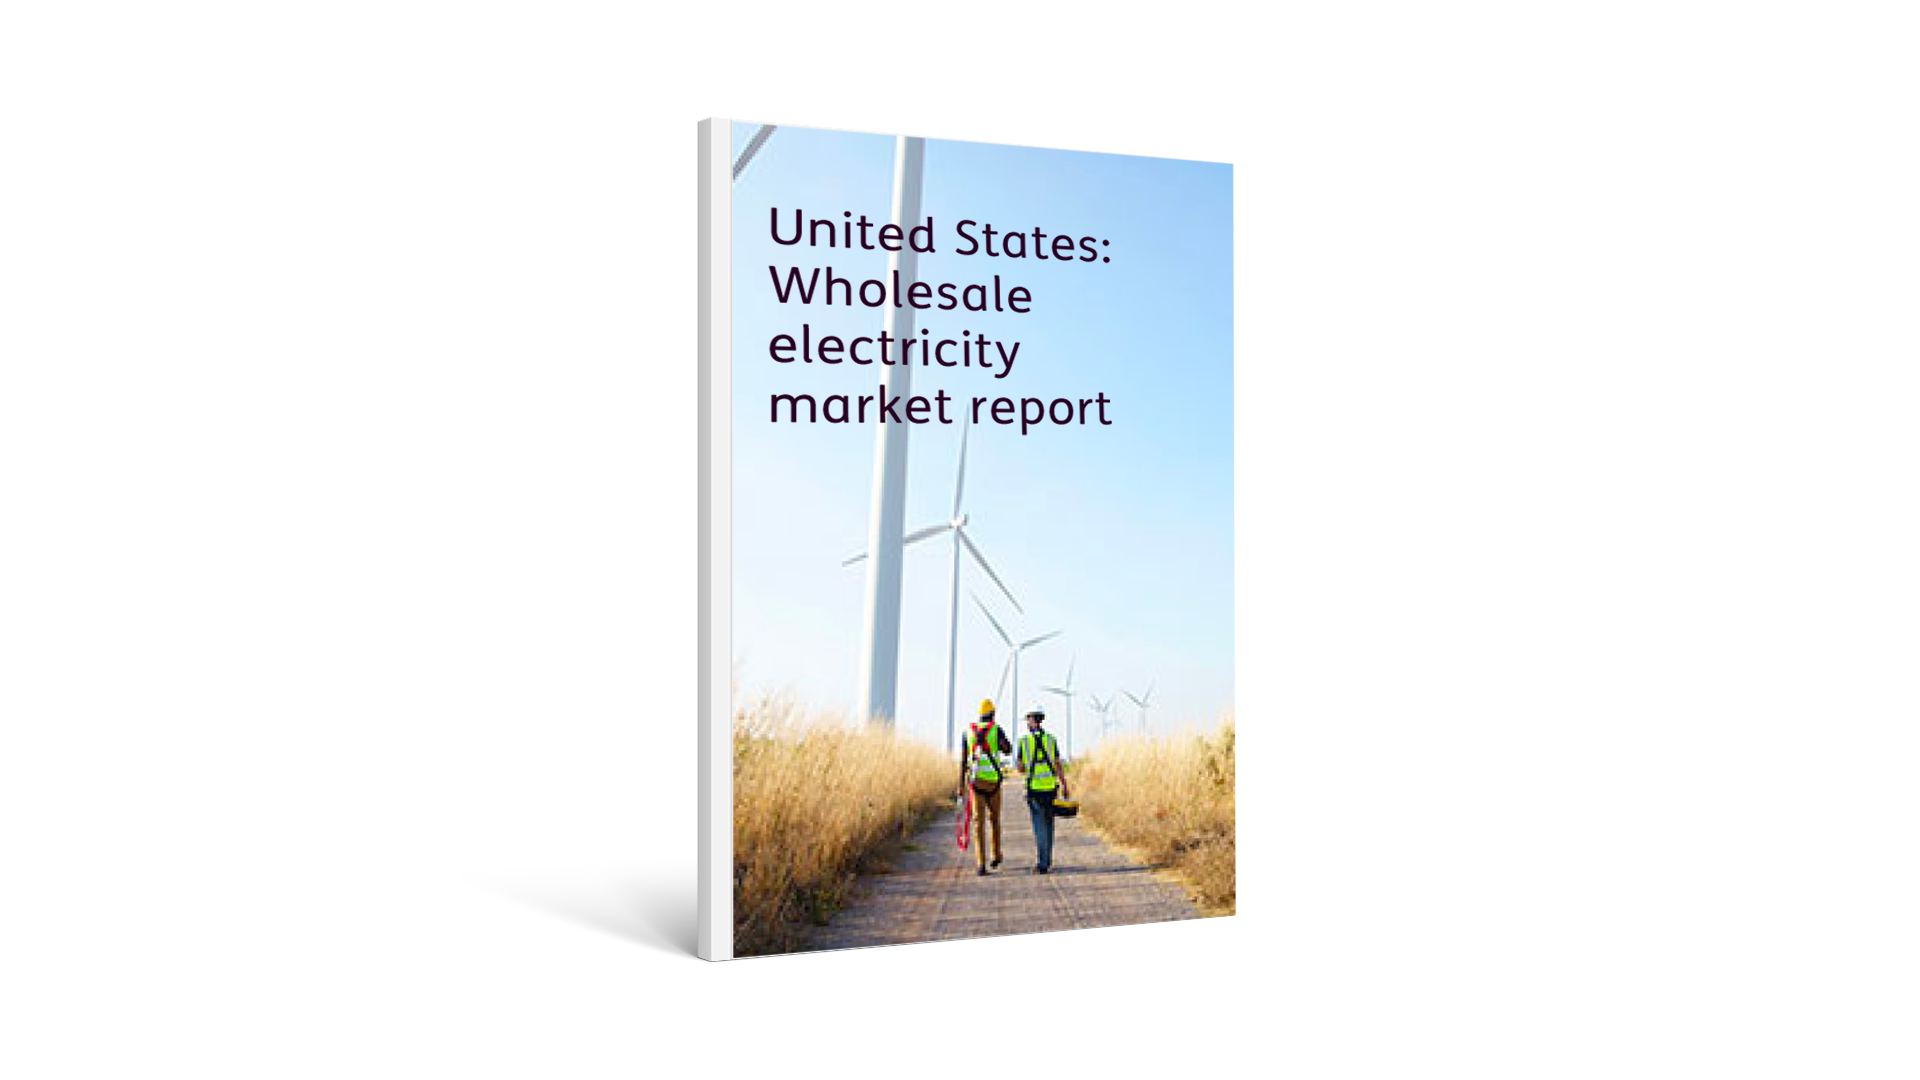 United States: Wholesale electricity market report